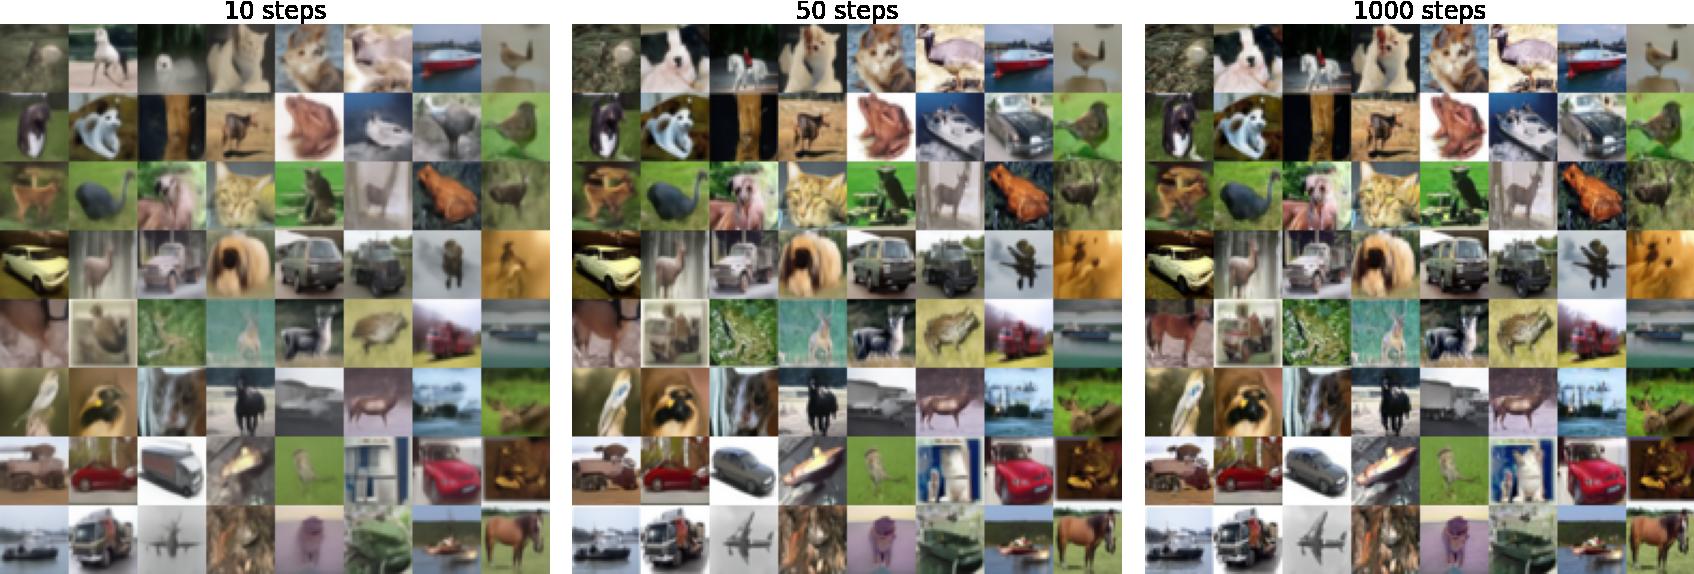 Sample of 64 images in an 8x8 grid all generated from the same initial values using 10, 50 and 1000 steps